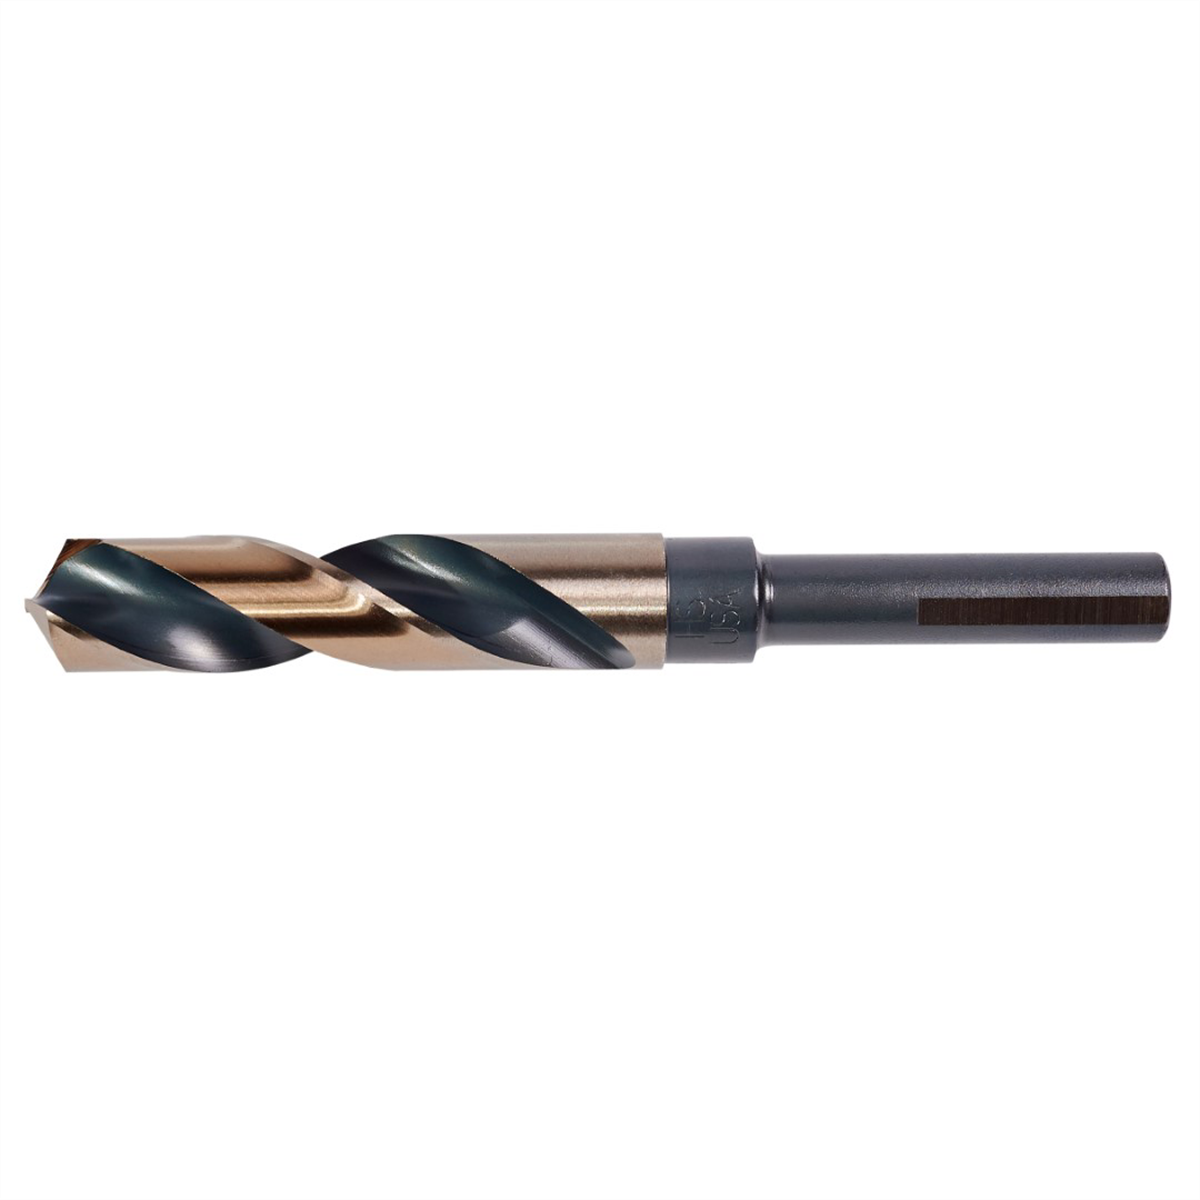 KnKut 7/8 Fractional S&D 1/2" Reduced Shank Drill ...